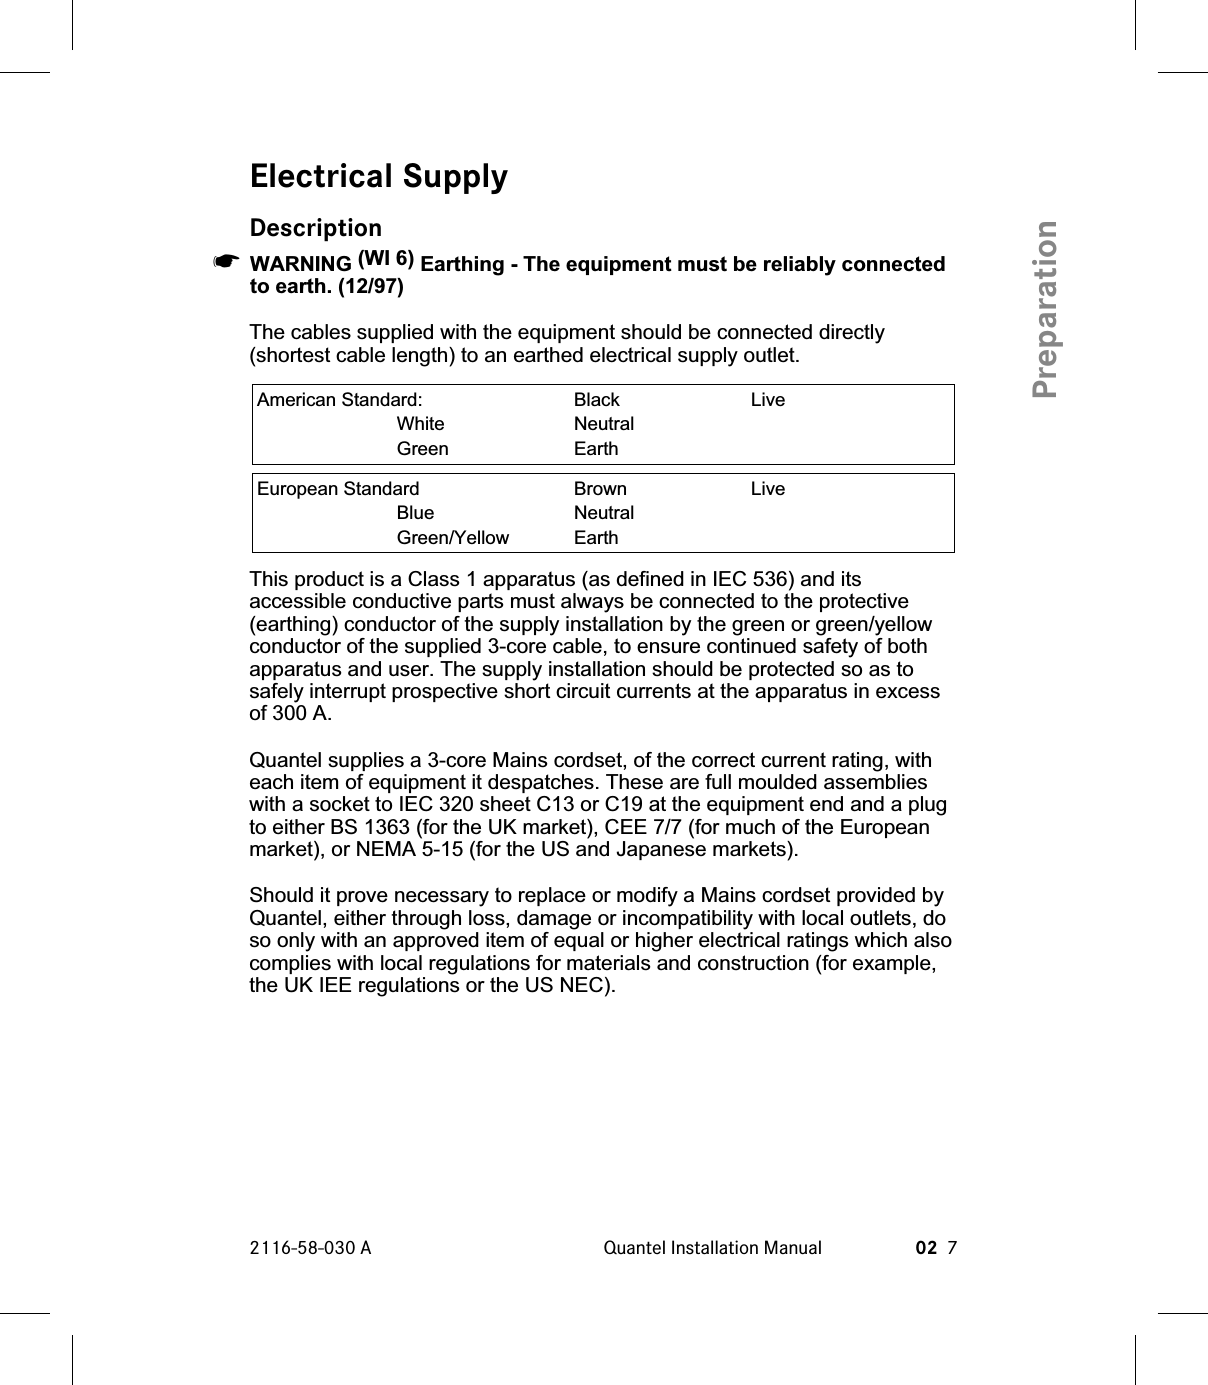 Electrical SupplyDescription☛WARNING (WI 6) Earthing - The equipment must be reliably connectedto earth. (12/97)The cables supplied with the equipment should be connected directly(shortest cable length) to an earthed electrical supply outlet.American Standard: Black LiveWhite NeutralGreen EarthEuropean Standard Brown LiveBlue NeutralGreen/Yellow EarthThis product is a Class 1 apparatus (as defined in IEC 536) and itsaccessible conductive parts must always be connected to the protective(earthing) conductor of the supply installation by the green or green/yellowconductor of the supplied 3-core cable, to ensure continued safety of bothapparatus and user. The supply installation should be protected so as tosafely interrupt prospective short circuit currents at the apparatus in excessof 300 A.Quantel supplies a 3-core Mains cordset, of the correct current rating, witheach item of equipment it despatches. These are full moulded assemblieswith a socket to IEC 320 sheet C13 or C19 at the equipment end and a plugto either BS 1363 (for the UK market), CEE 7/7 (for much of the Europeanmarket), or NEMA 5-15 (for the US and Japanese markets).Should it prove necessary to replace or modify a Mains cordset provided byQuantel, either through loss, damage or incompatibility with local outlets, doso only with an approved item of equal or higher electrical ratings which alsocomplies with local regulations for materials and construction (for example,the UK IEE regulations or the US NEC).2116-58-030 A Quantel Installation Manual 02 7Preparation